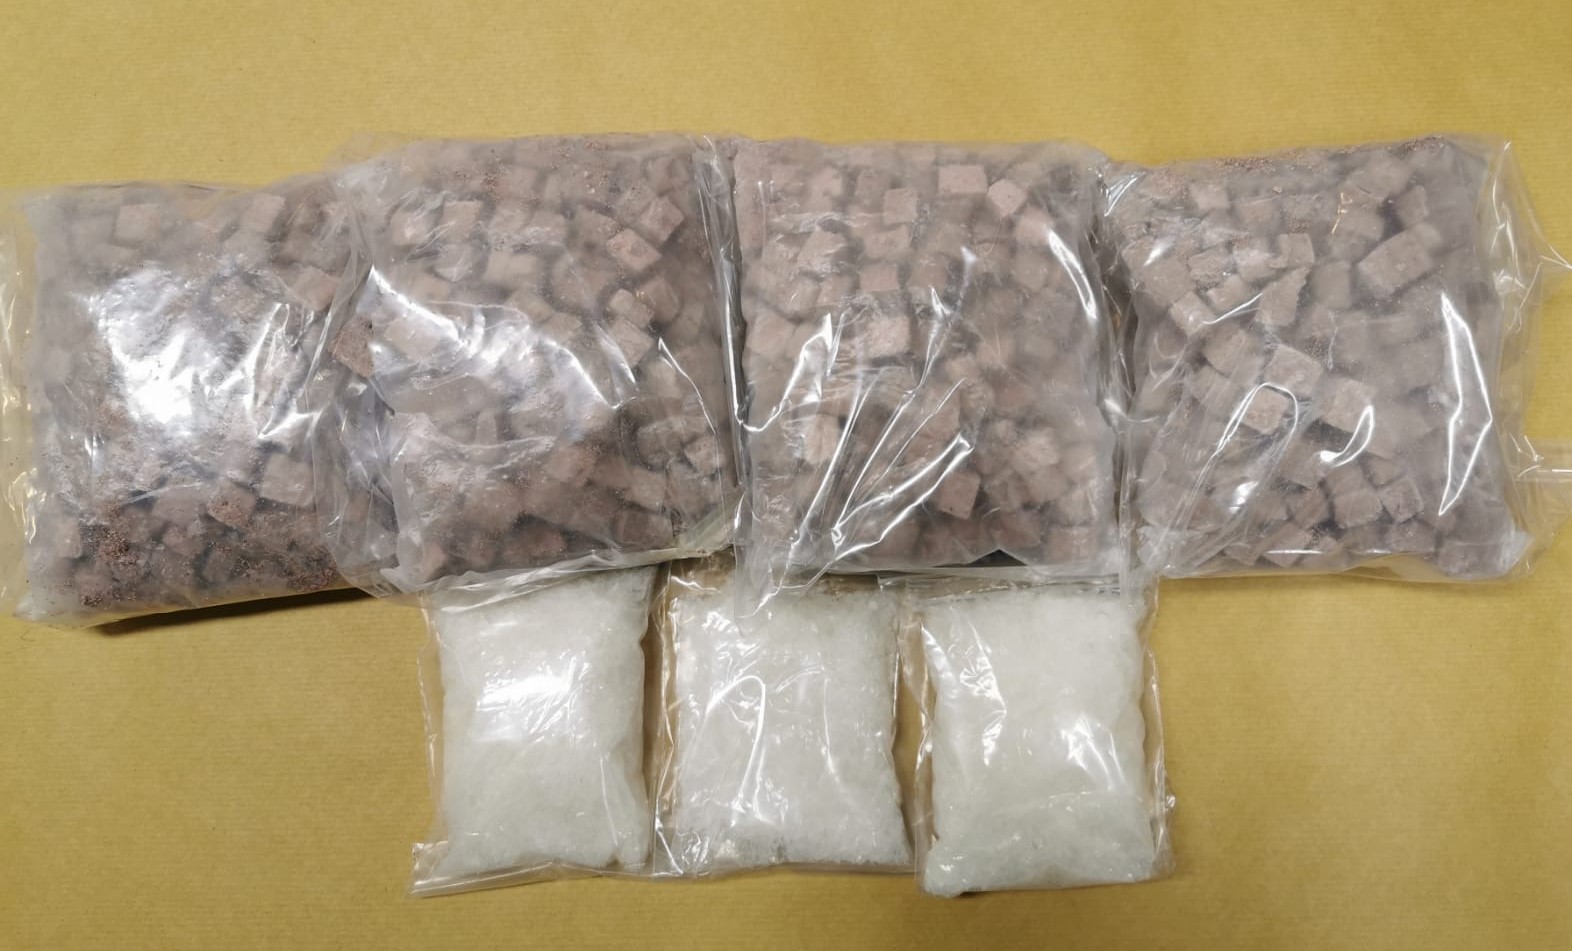 Photo-3 (CNB): Heroin and ‘Ice’ seized in CNB operation on night of 25 February 2020.